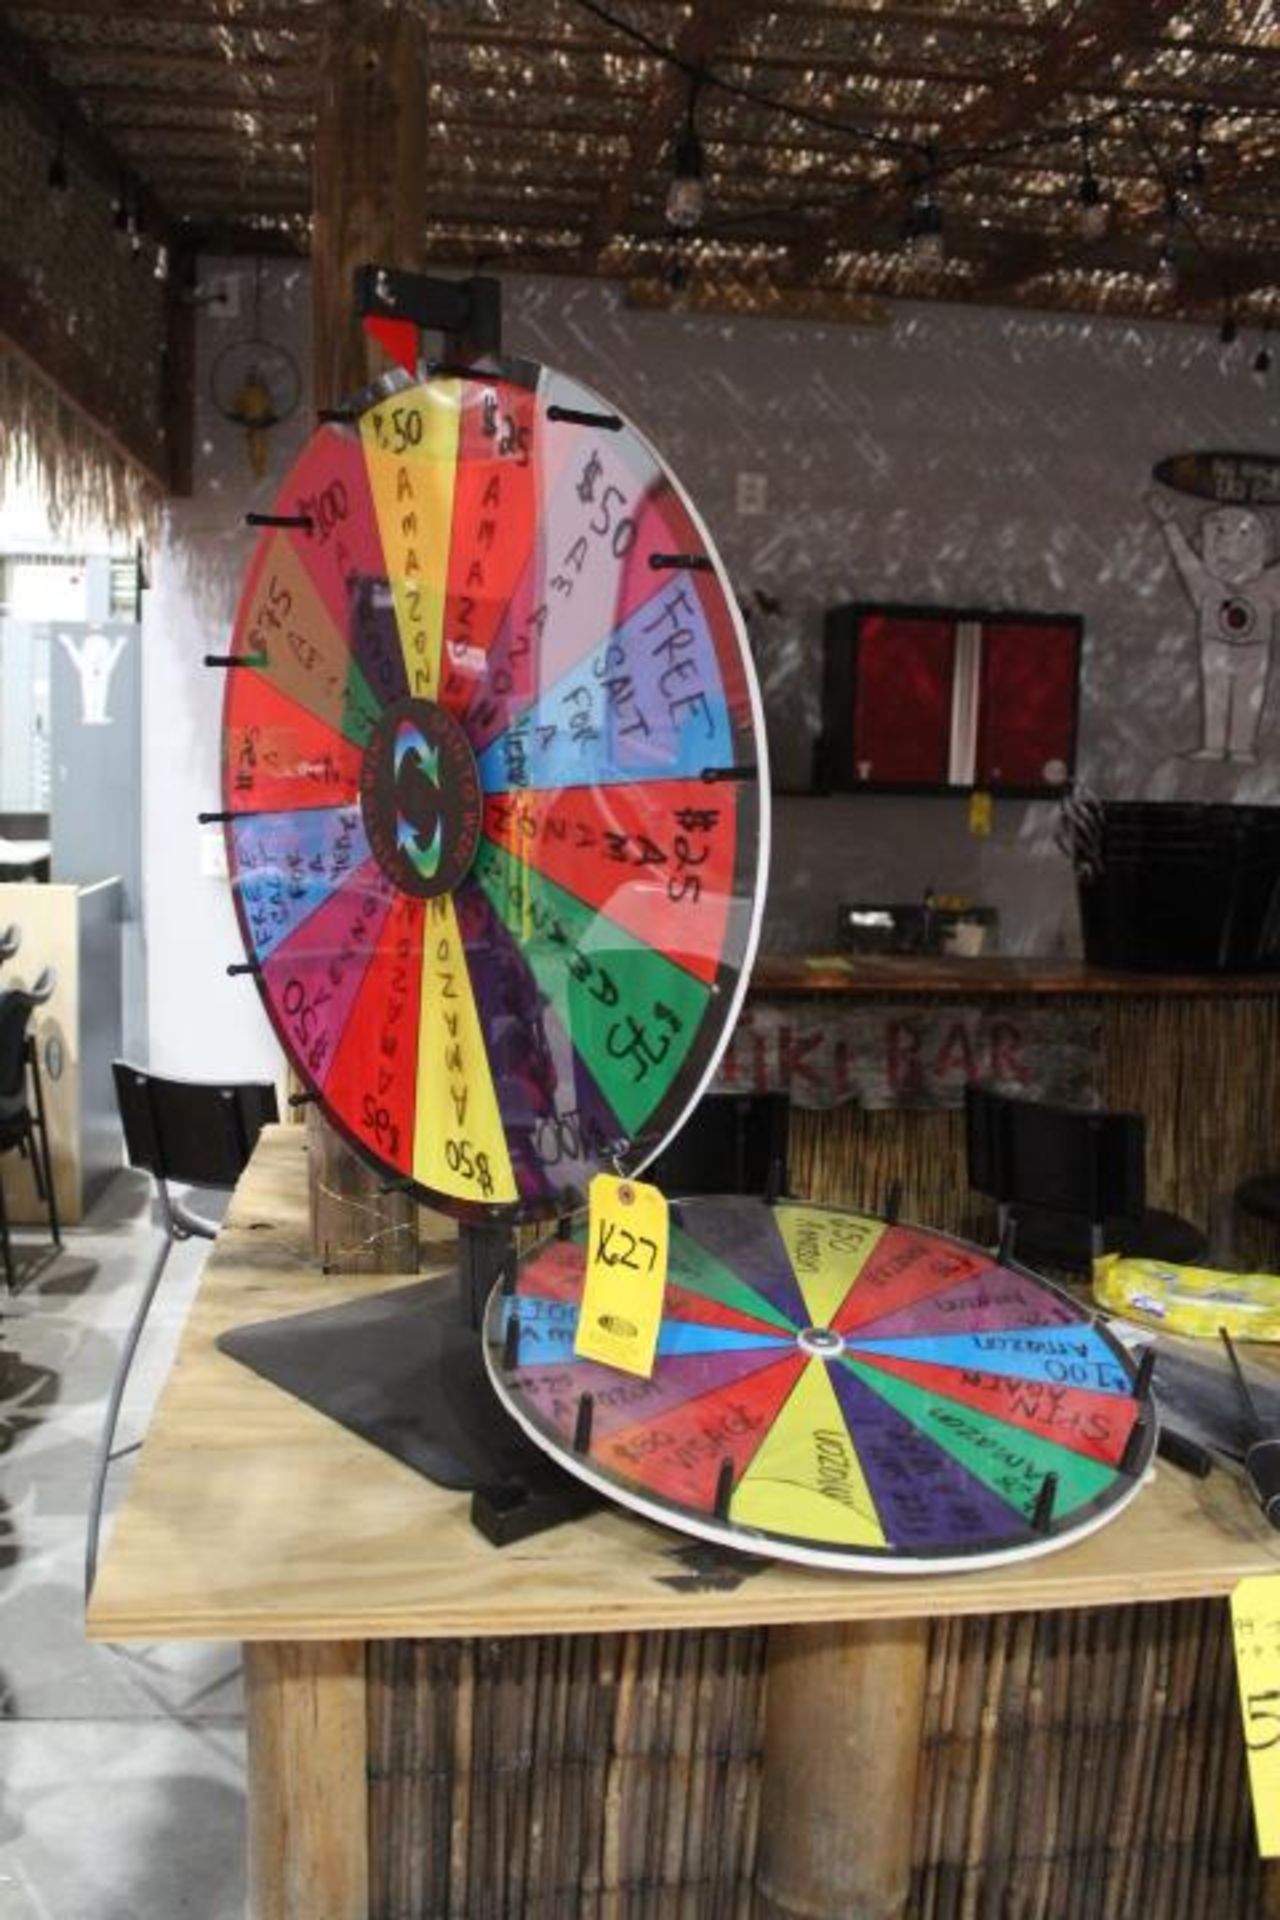 (2) SPINNING PRIZE WHEELS